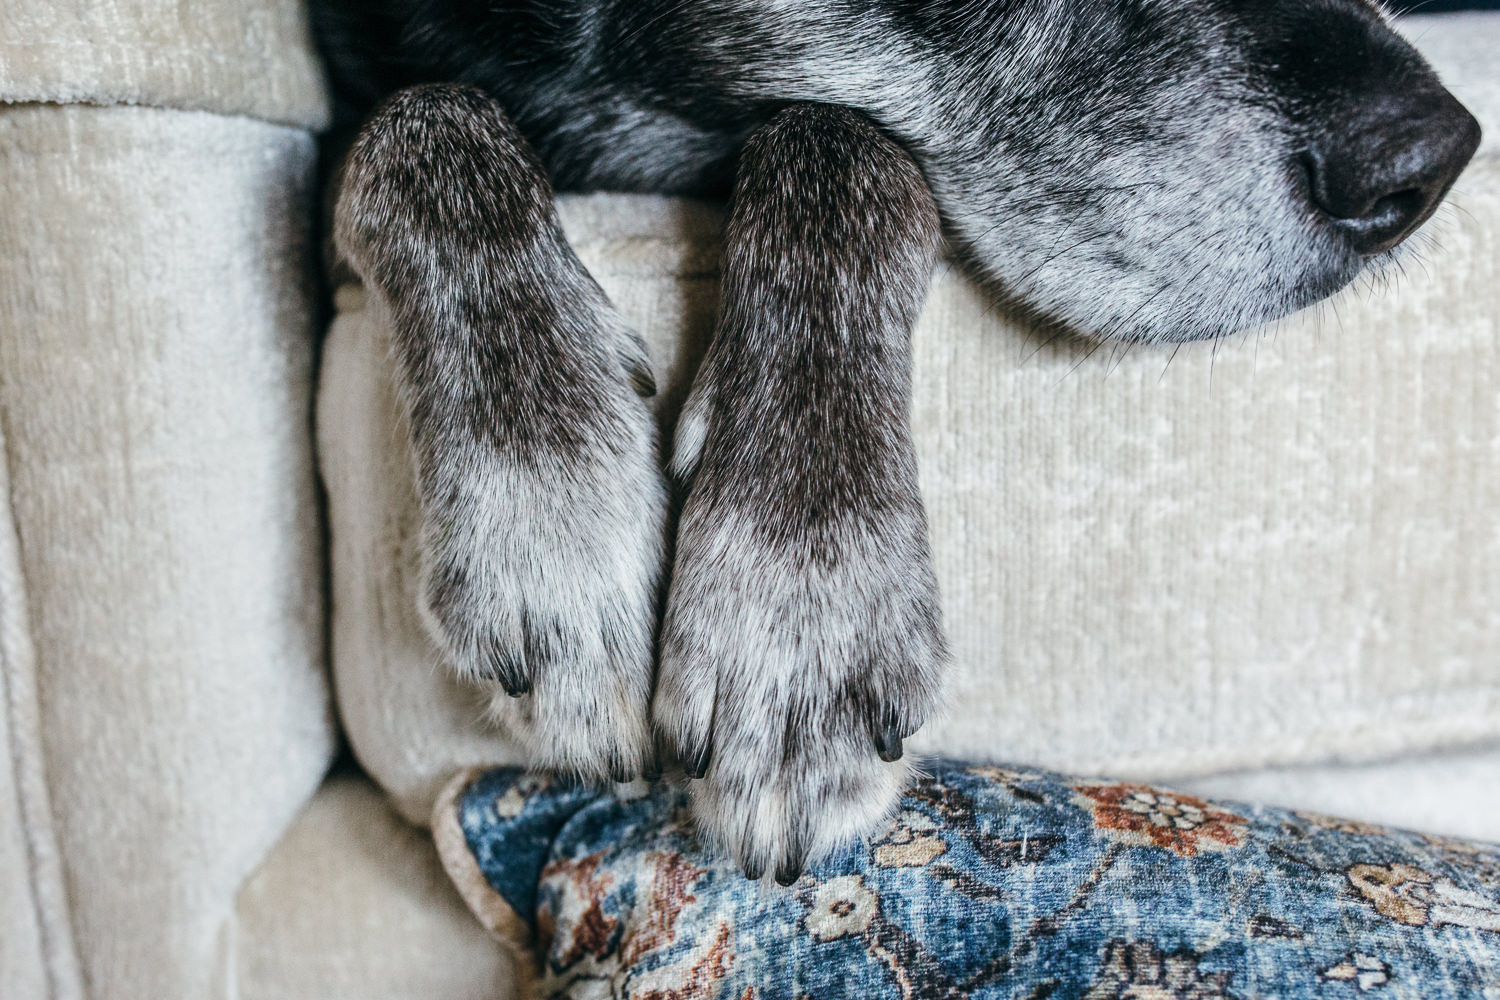 close up details of a dog's paws and nose